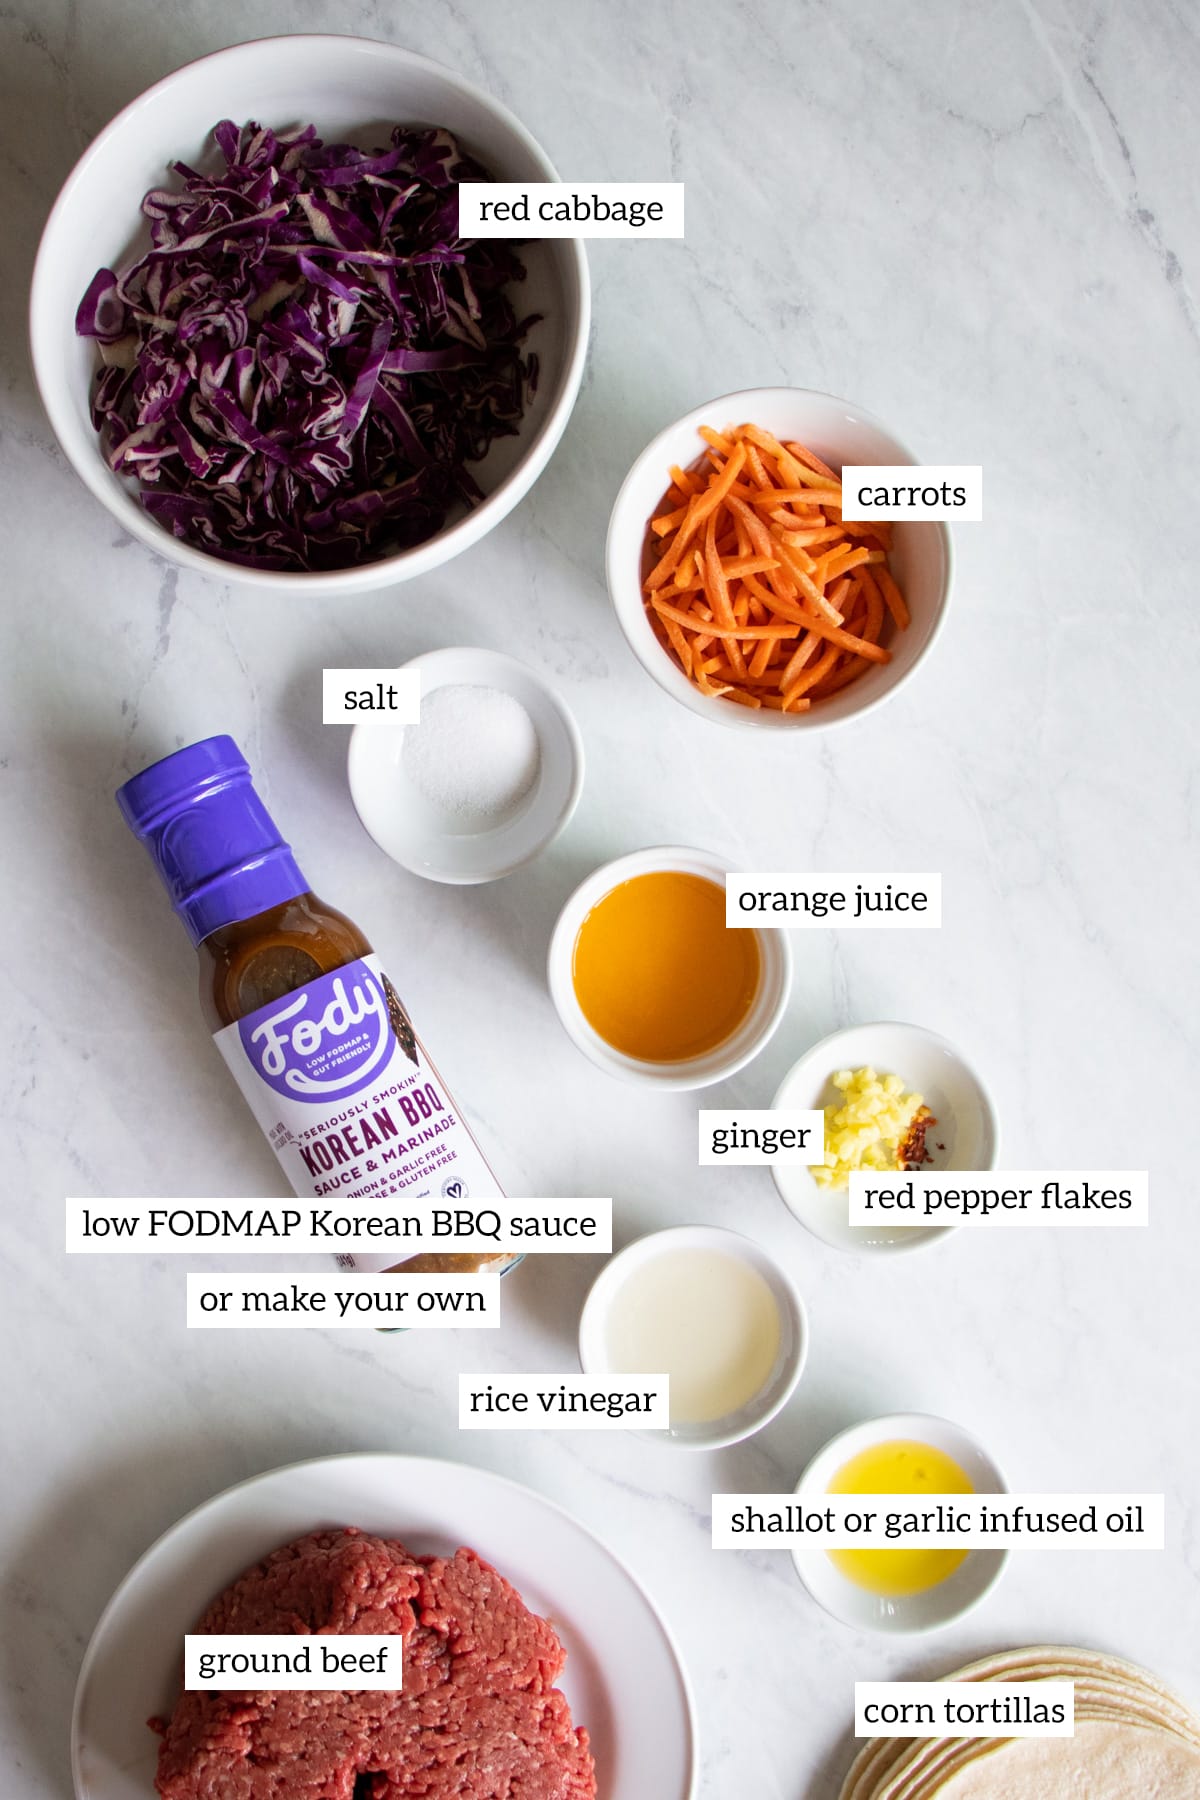 The ingredients needed to make Low FODMAP Korean Tacos are prepared and measured out into individual dishes.